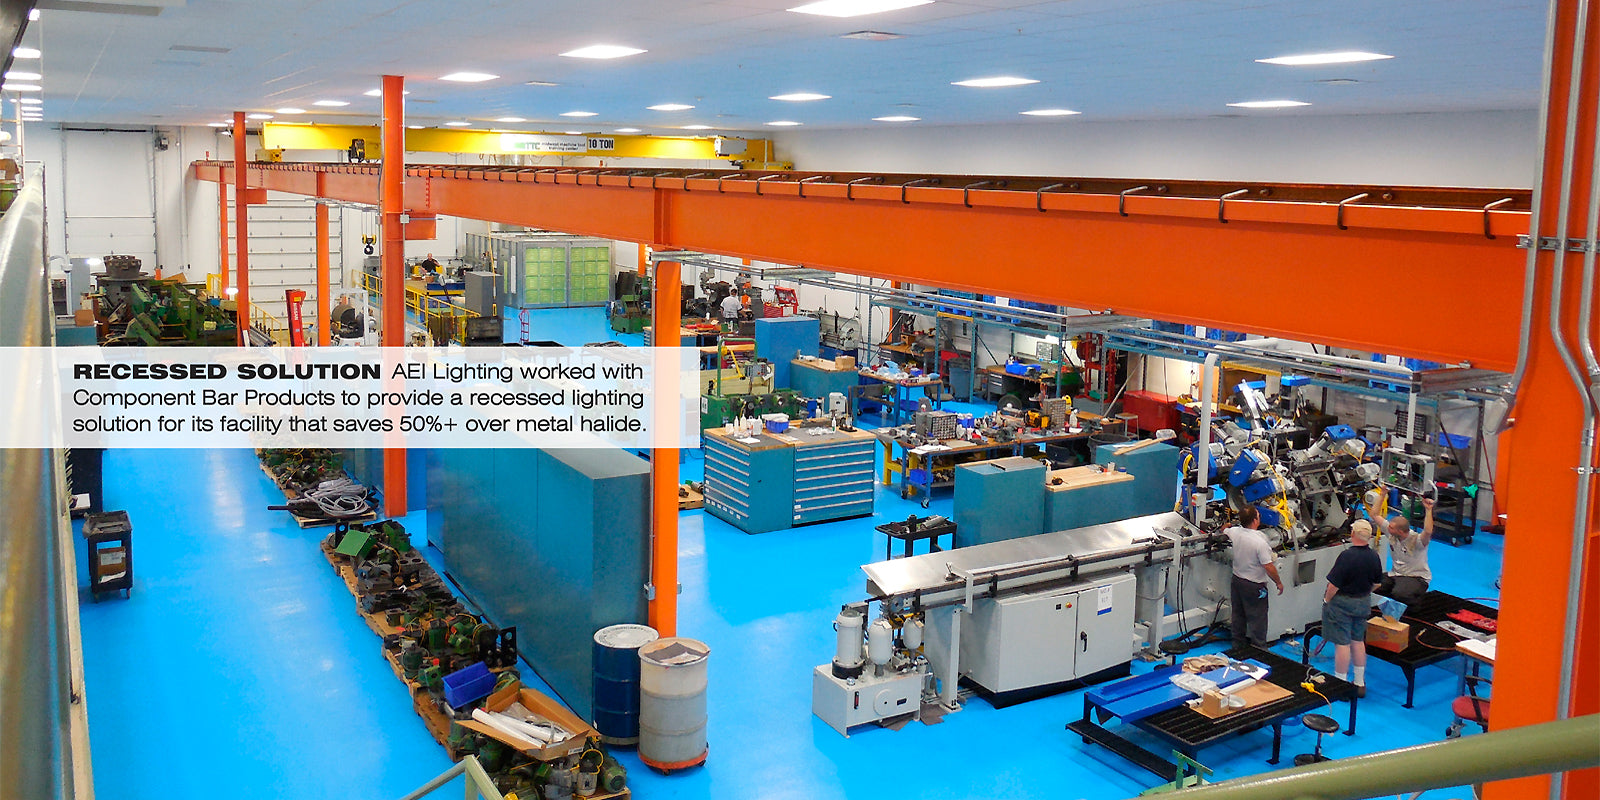 AEI Lighting's LED Fixtures for Industrial, Commercial and Retail Applications